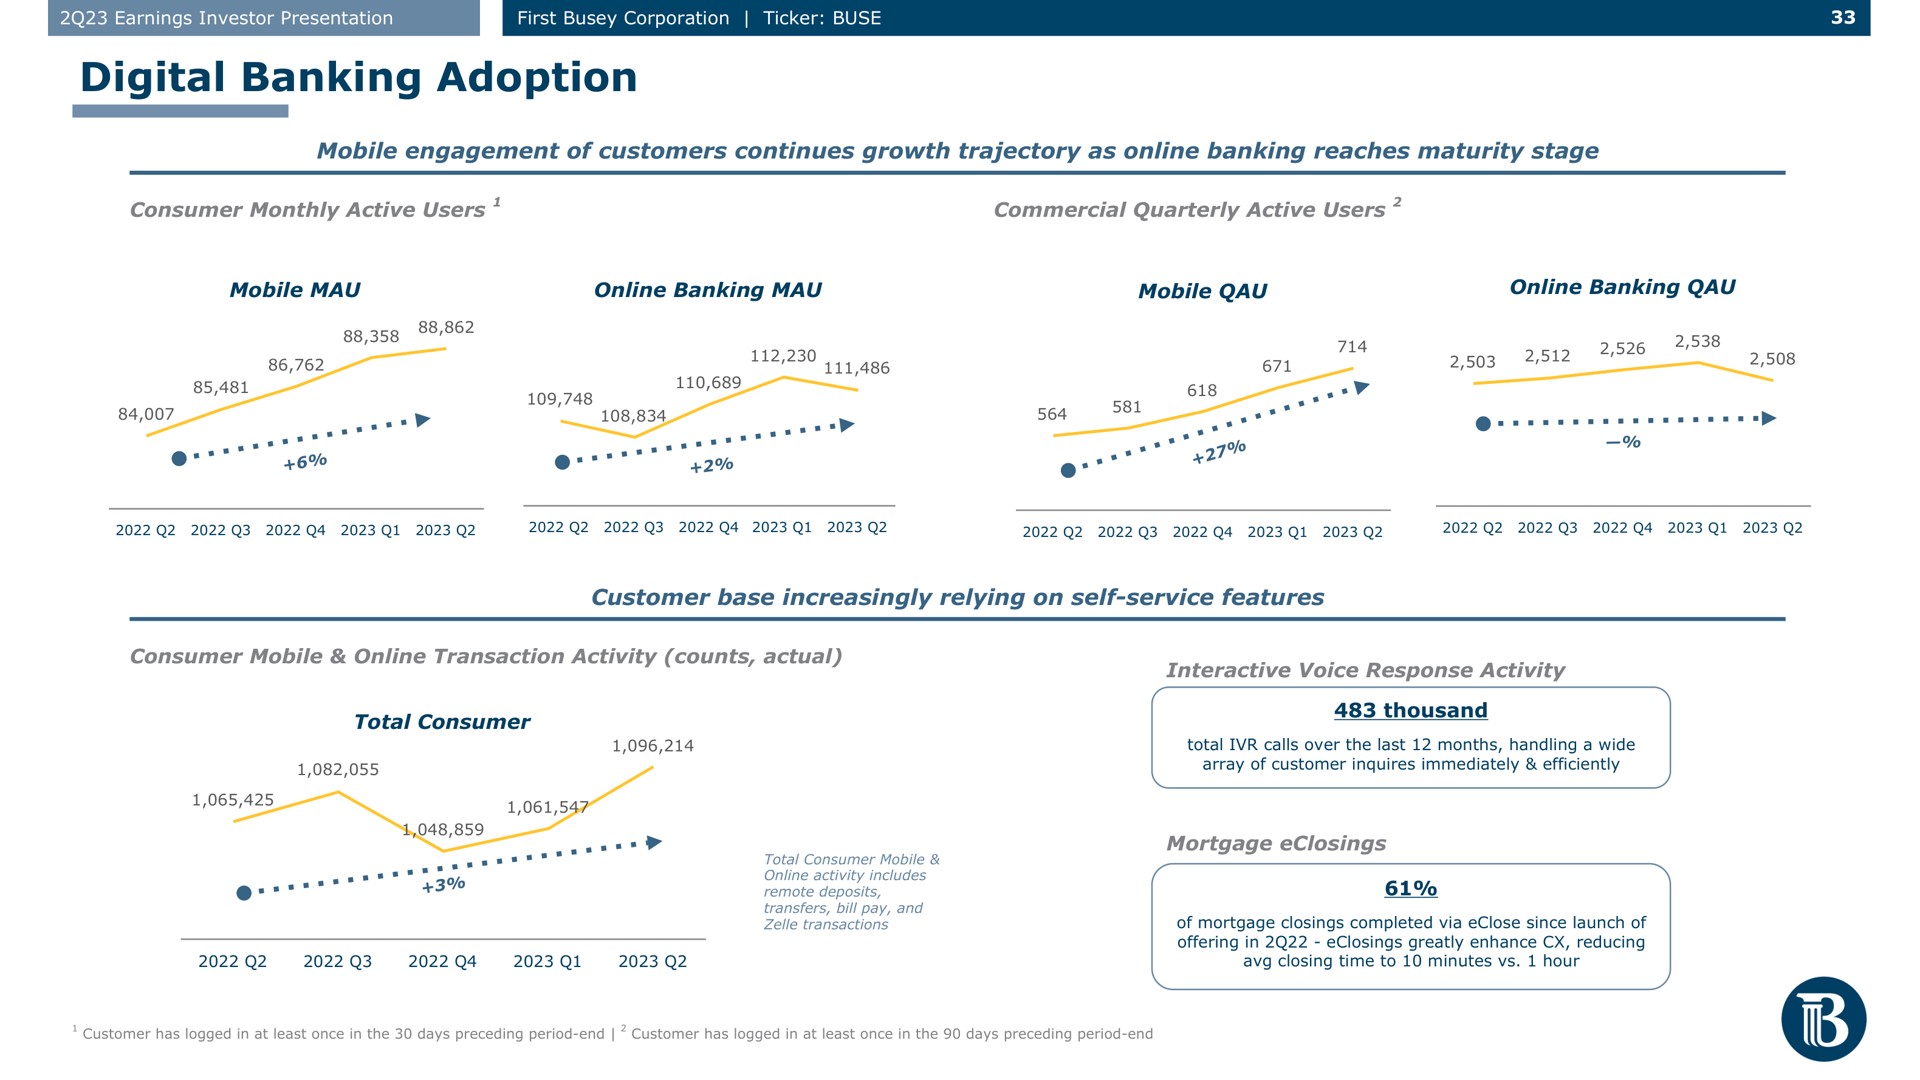 digital banking adoption consumer monthly active users mobile a i ser | First Busey